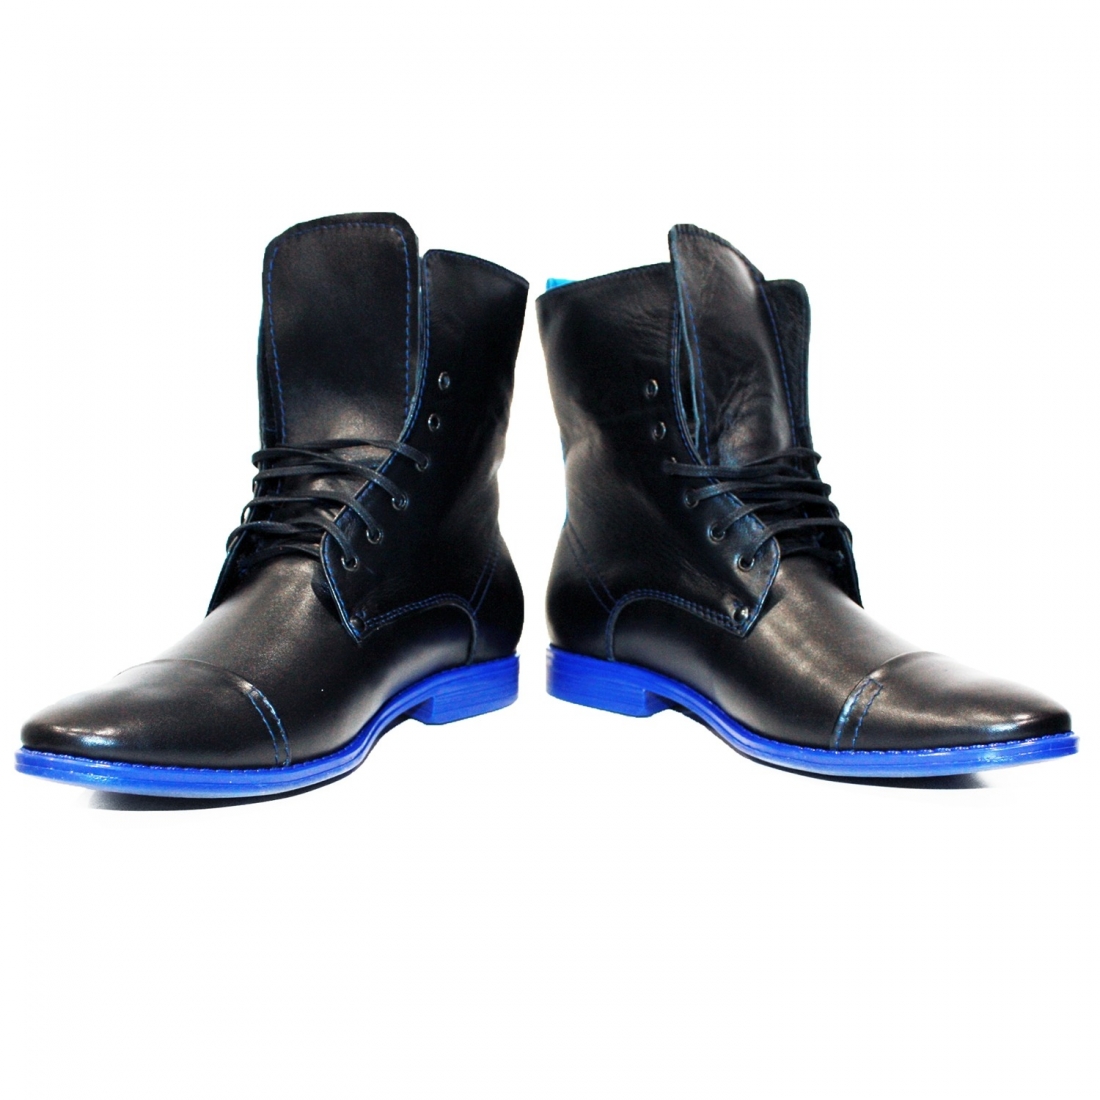 Modello Lomatetto - High Boots - Handmade Colorful Italian Leather Shoes